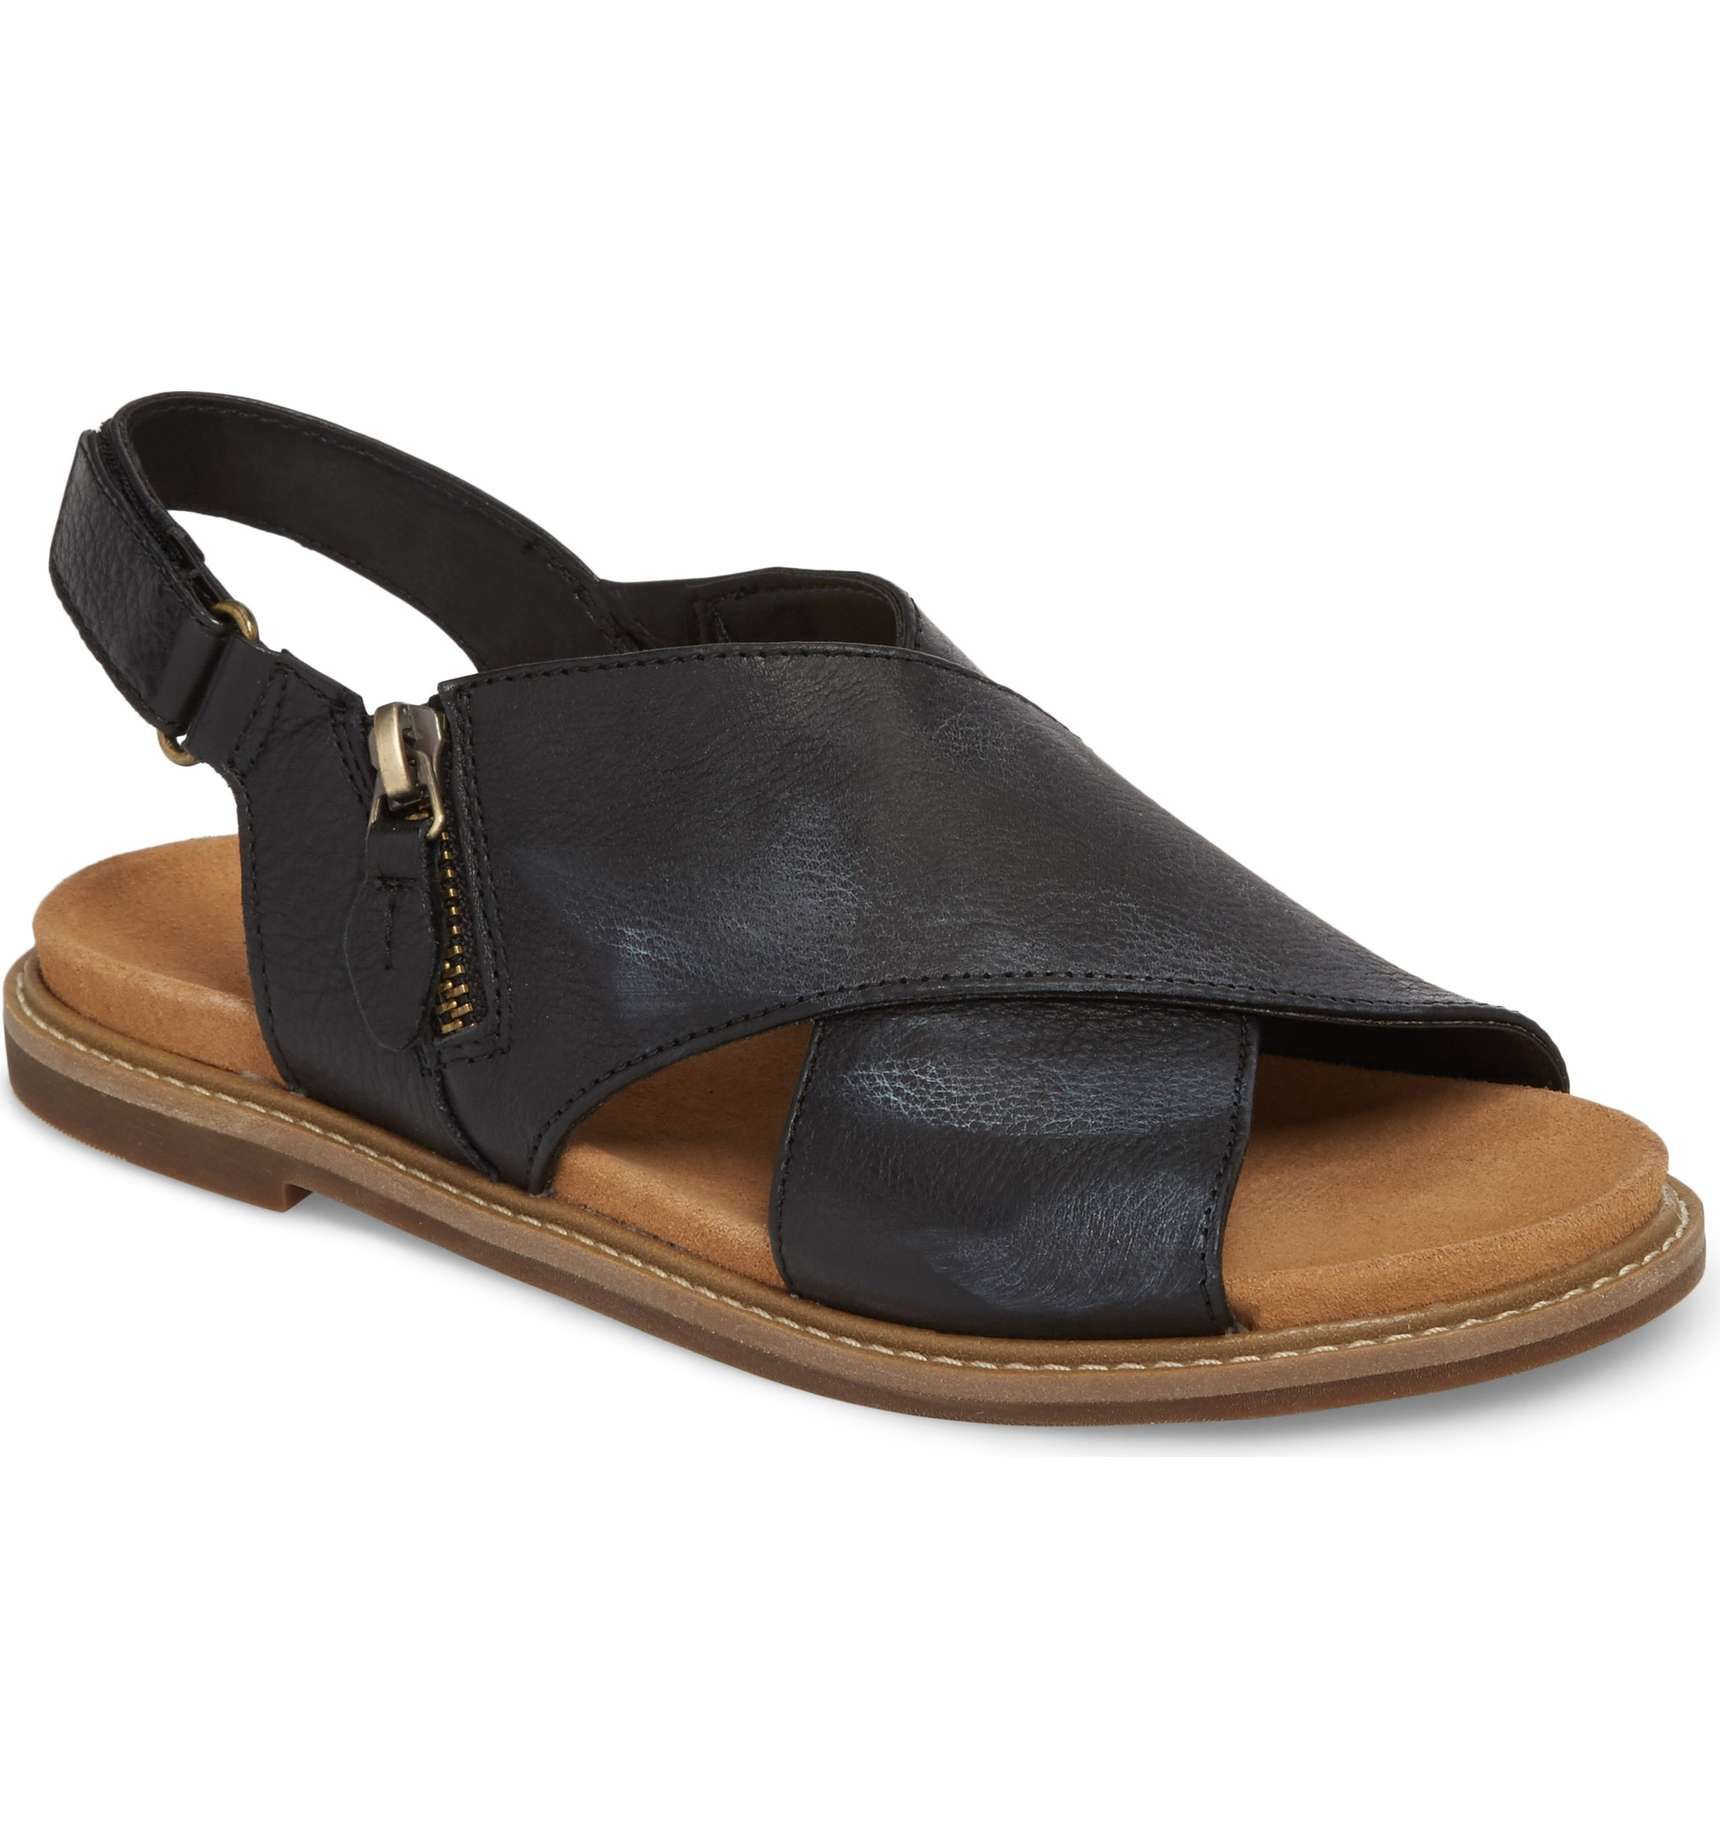 clarks arch support \u003e Clearance shop